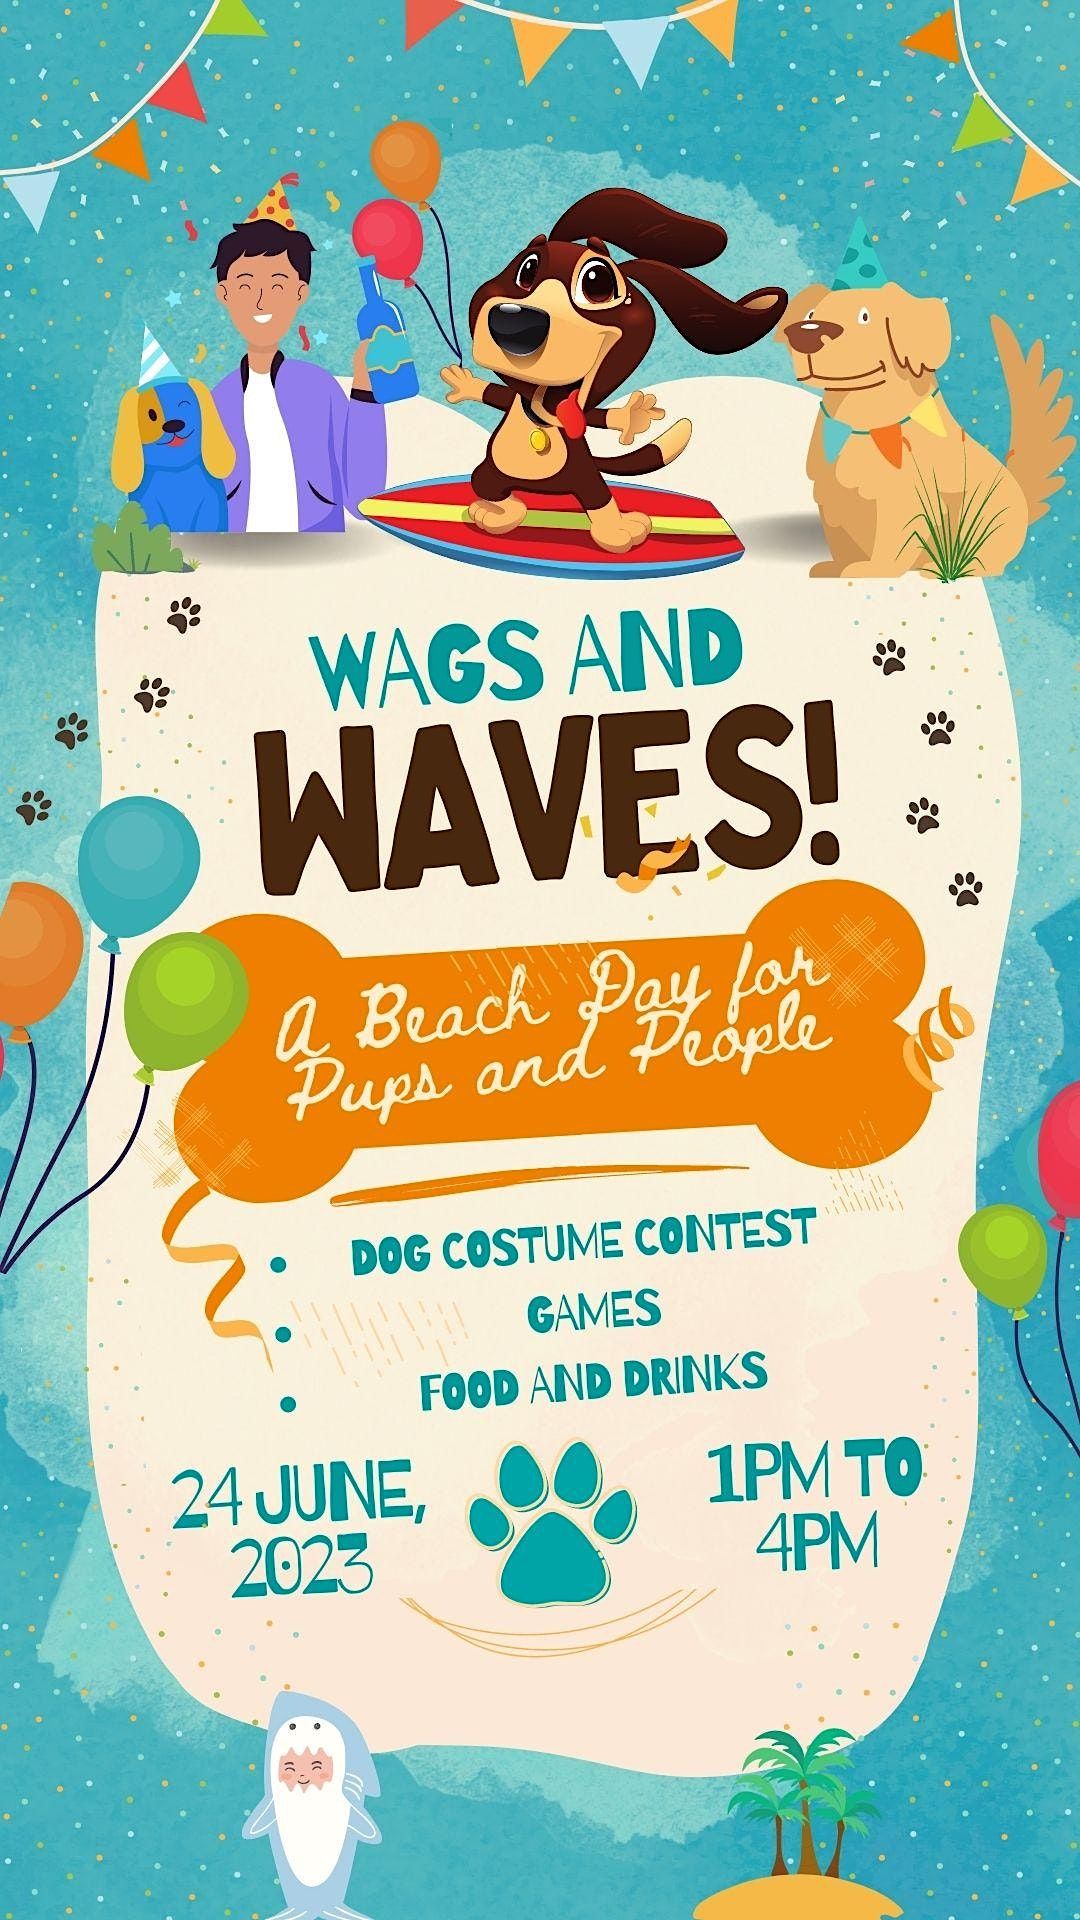 Wags and Waves - Marina Del Rey